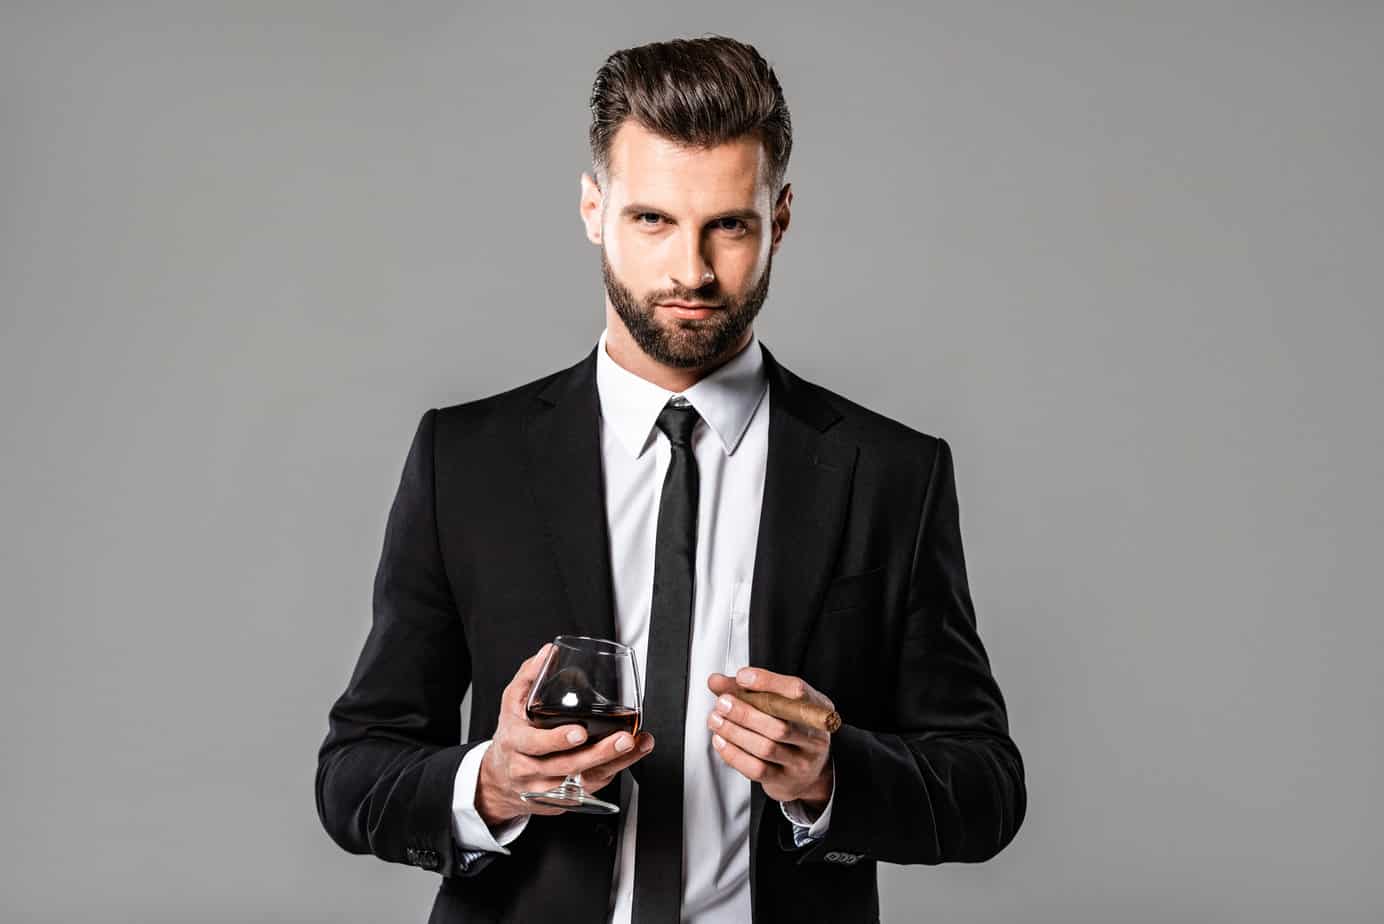 A man in a suit holding a glass of wine